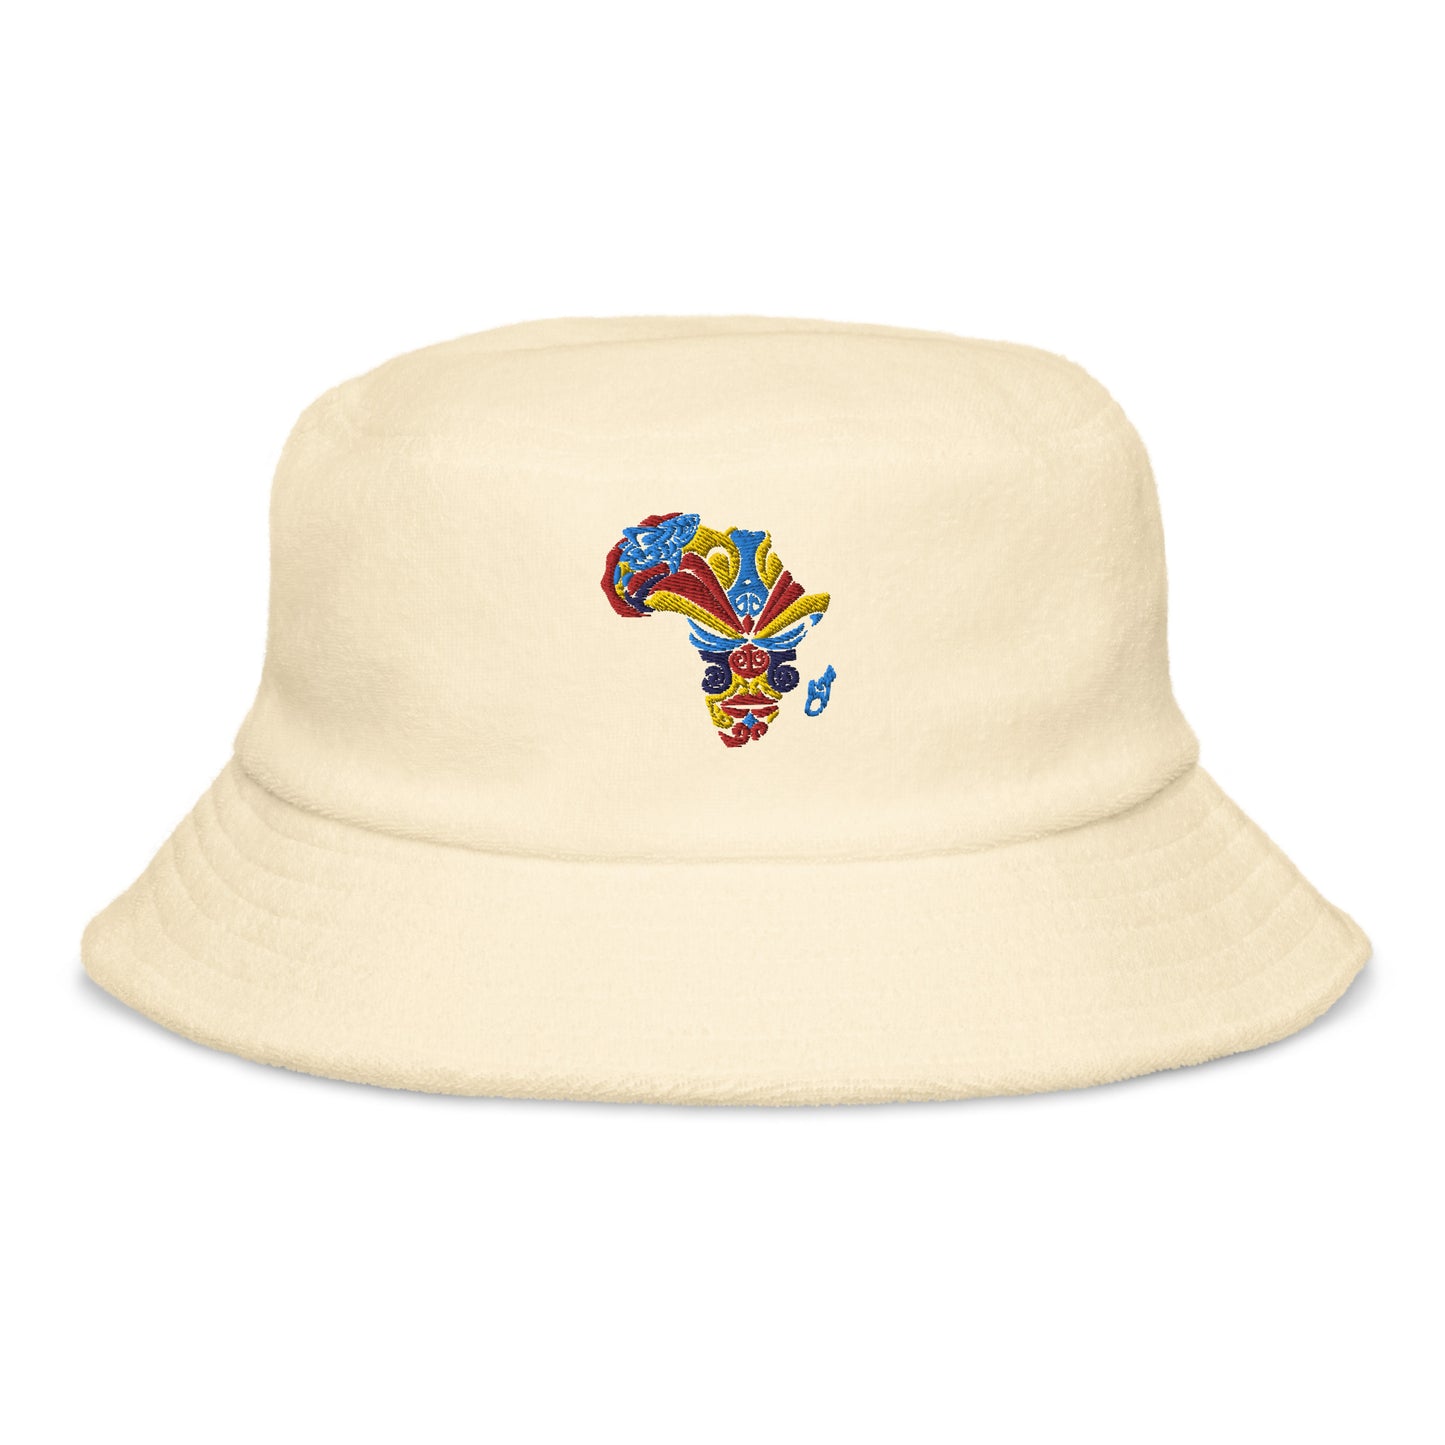 Terry Cloth Bucket Hat - Banamerica Collection